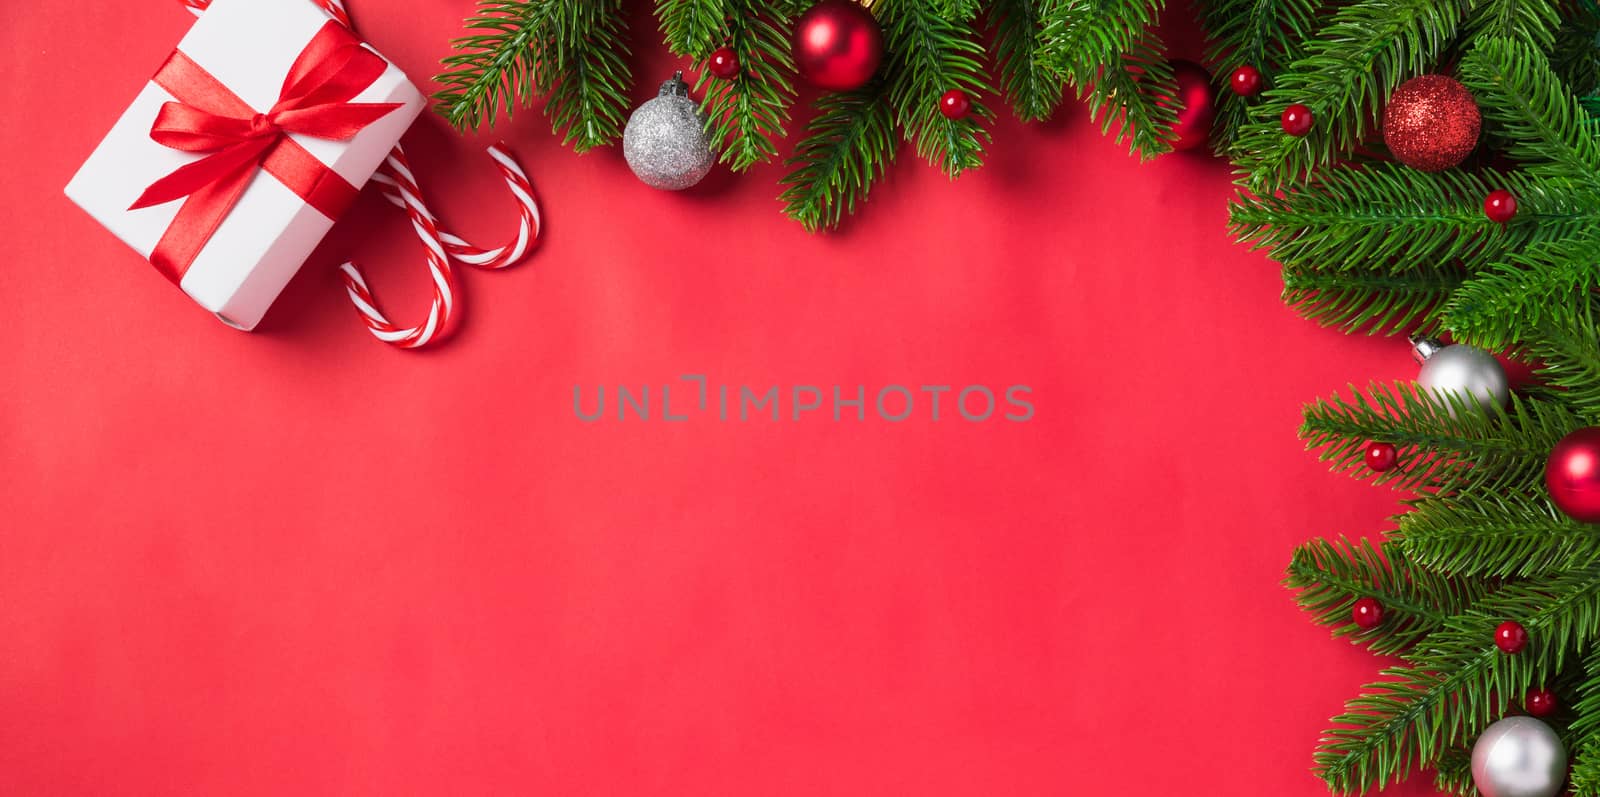 Christmas holiday background with gift box decorations compositi by Sorapop